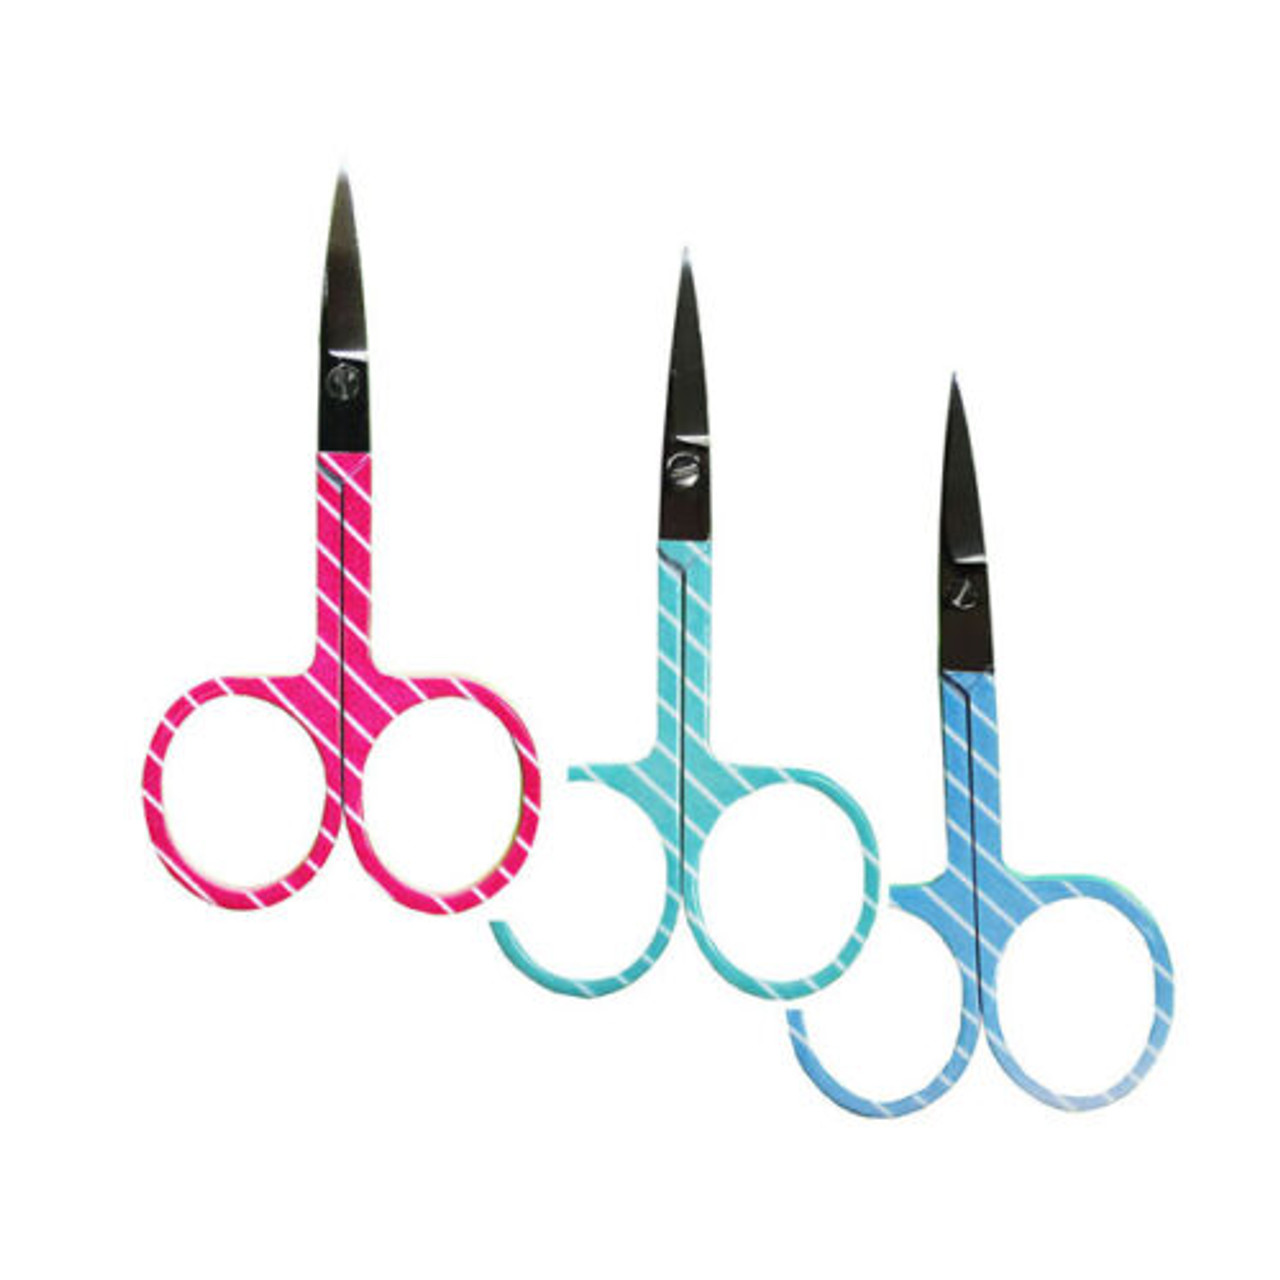 3.5 Premium Embroidery Scissors with Magnifier | Tooltron #TT00112